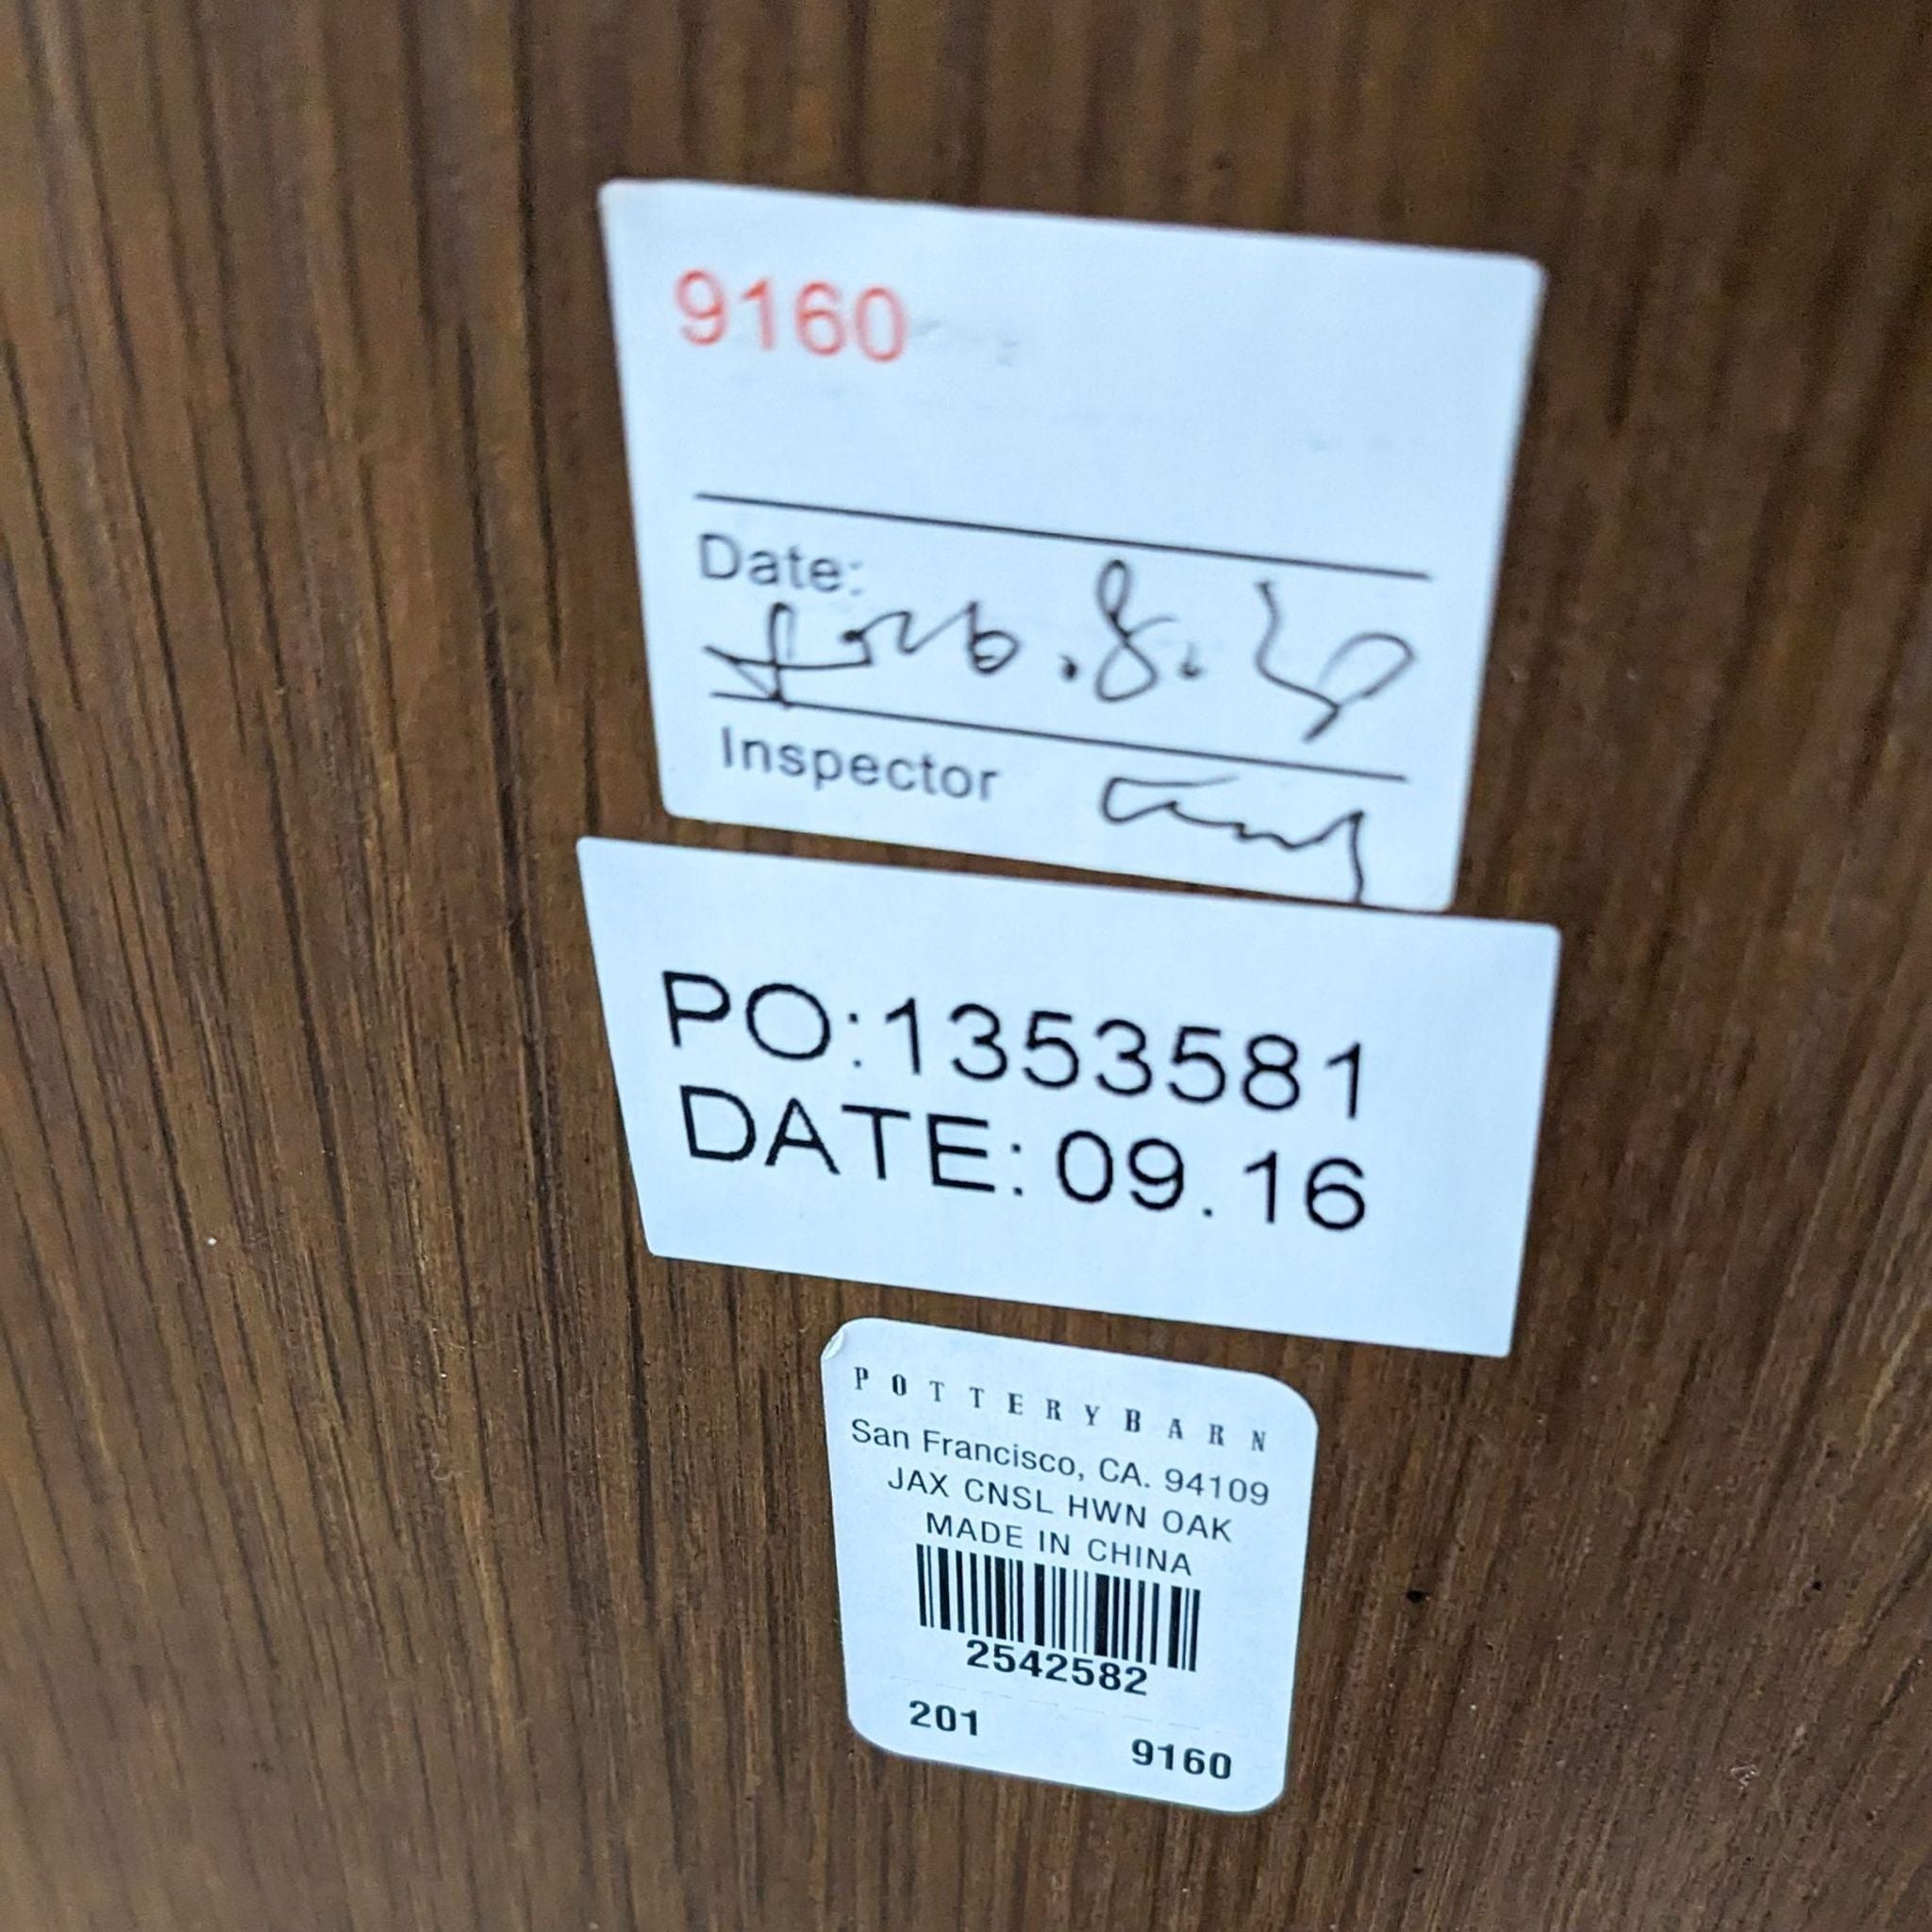 Close-up of Pottery Barn furniture label on wooden surface with inspection details and product information.